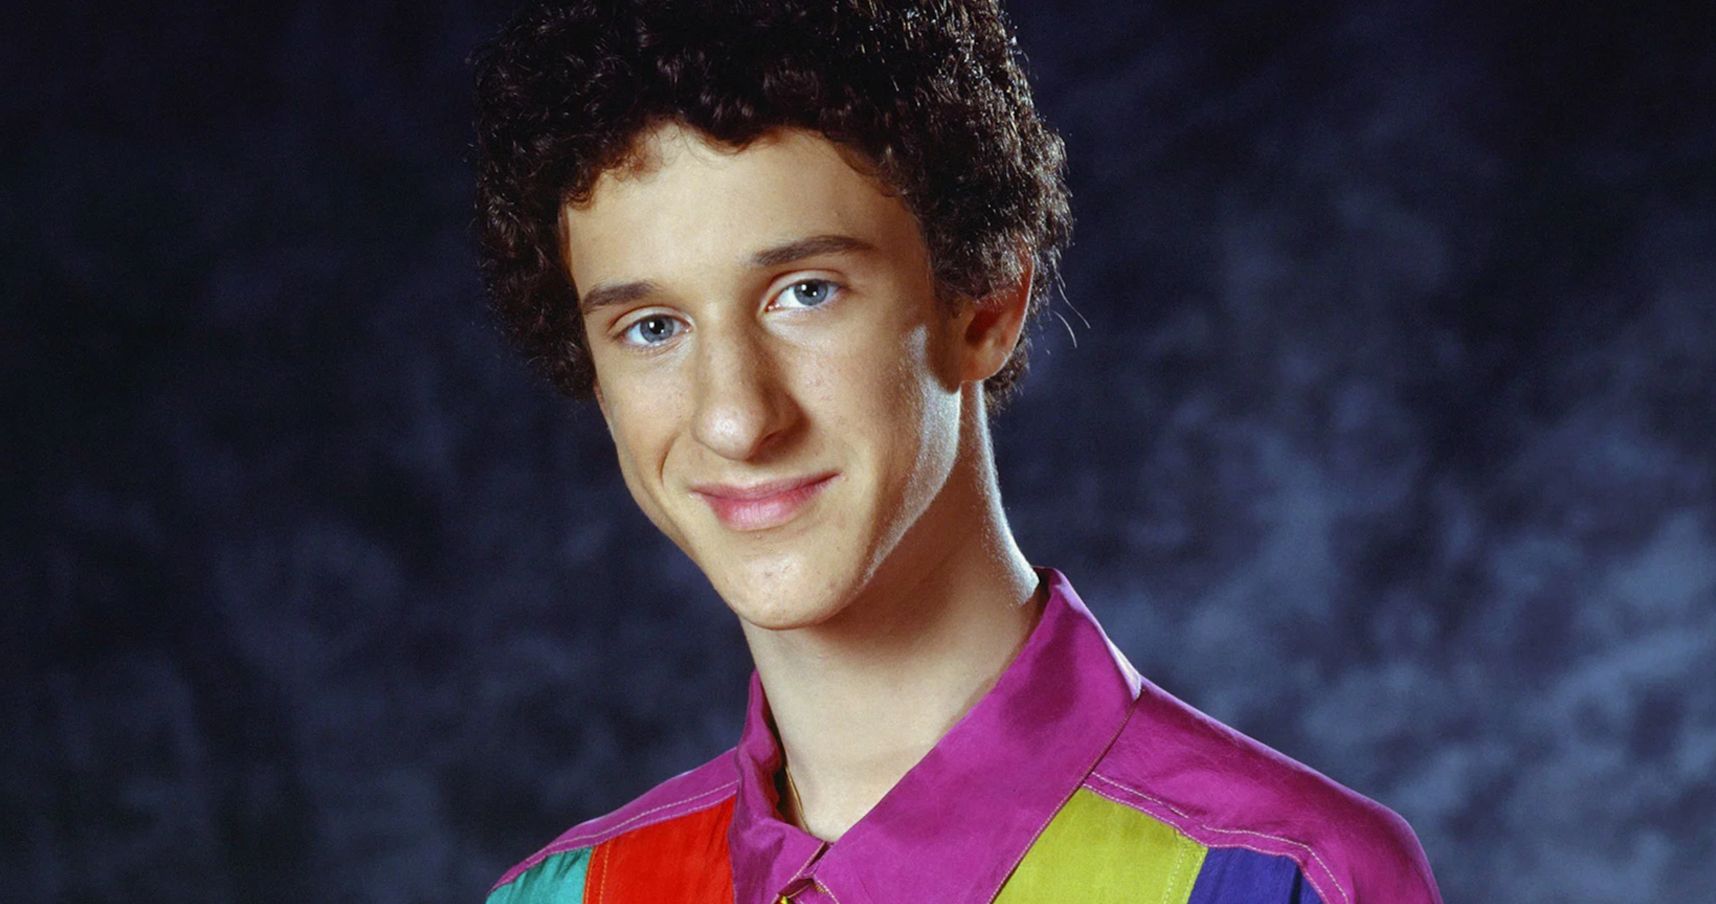 Dustin Diamond Dies, Screech from Saved by the Bell Was 44